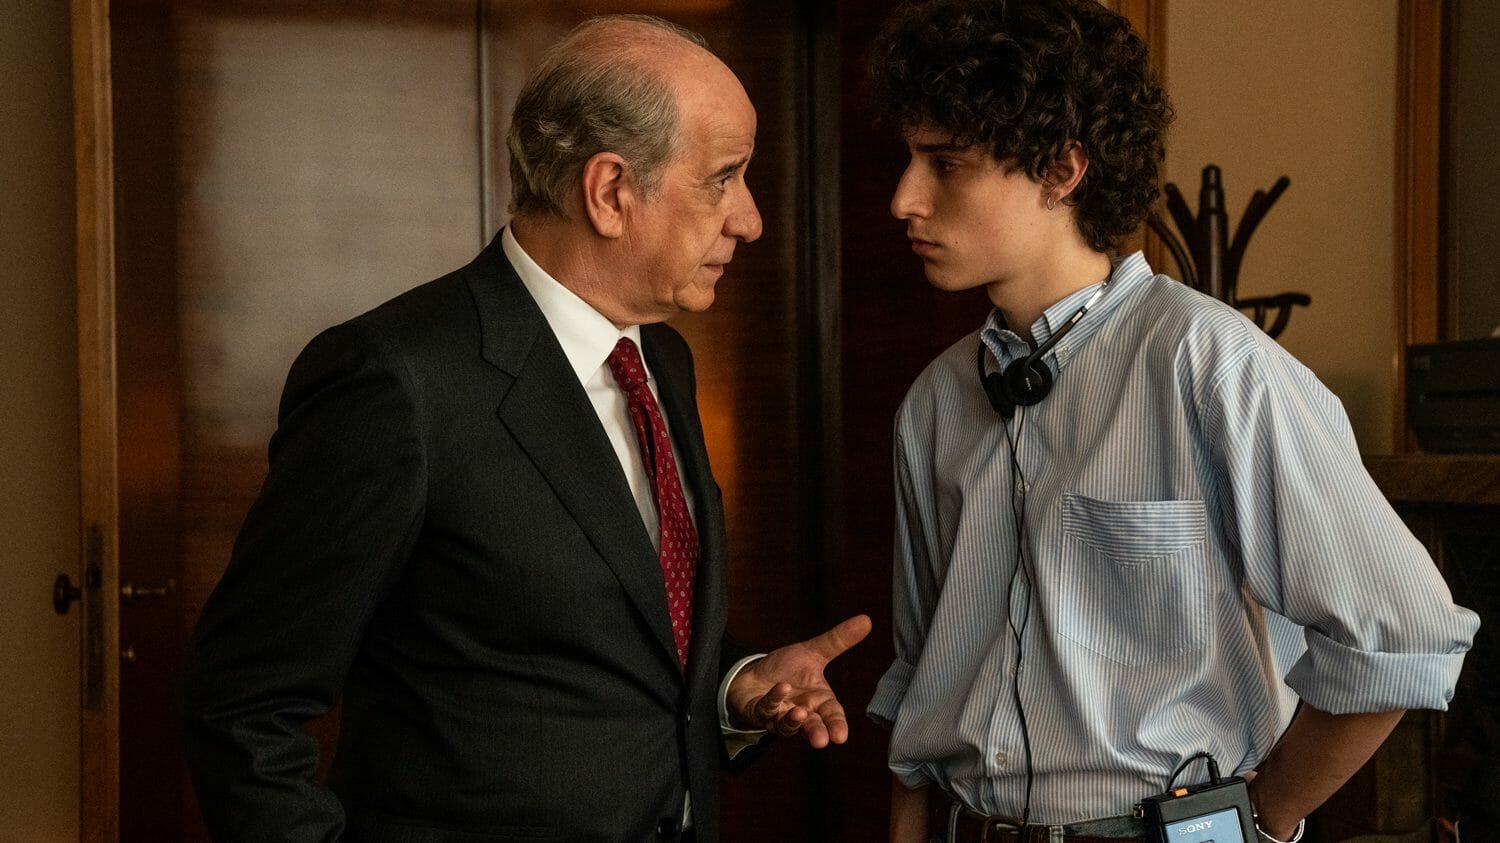 Toni Servillo wearing a business suit lectures Filippo Scotti with a Sony walkman around his neck in THE HAND OF GOD on Netflix, nominated for Best International Feature at the 2022 Oscars.